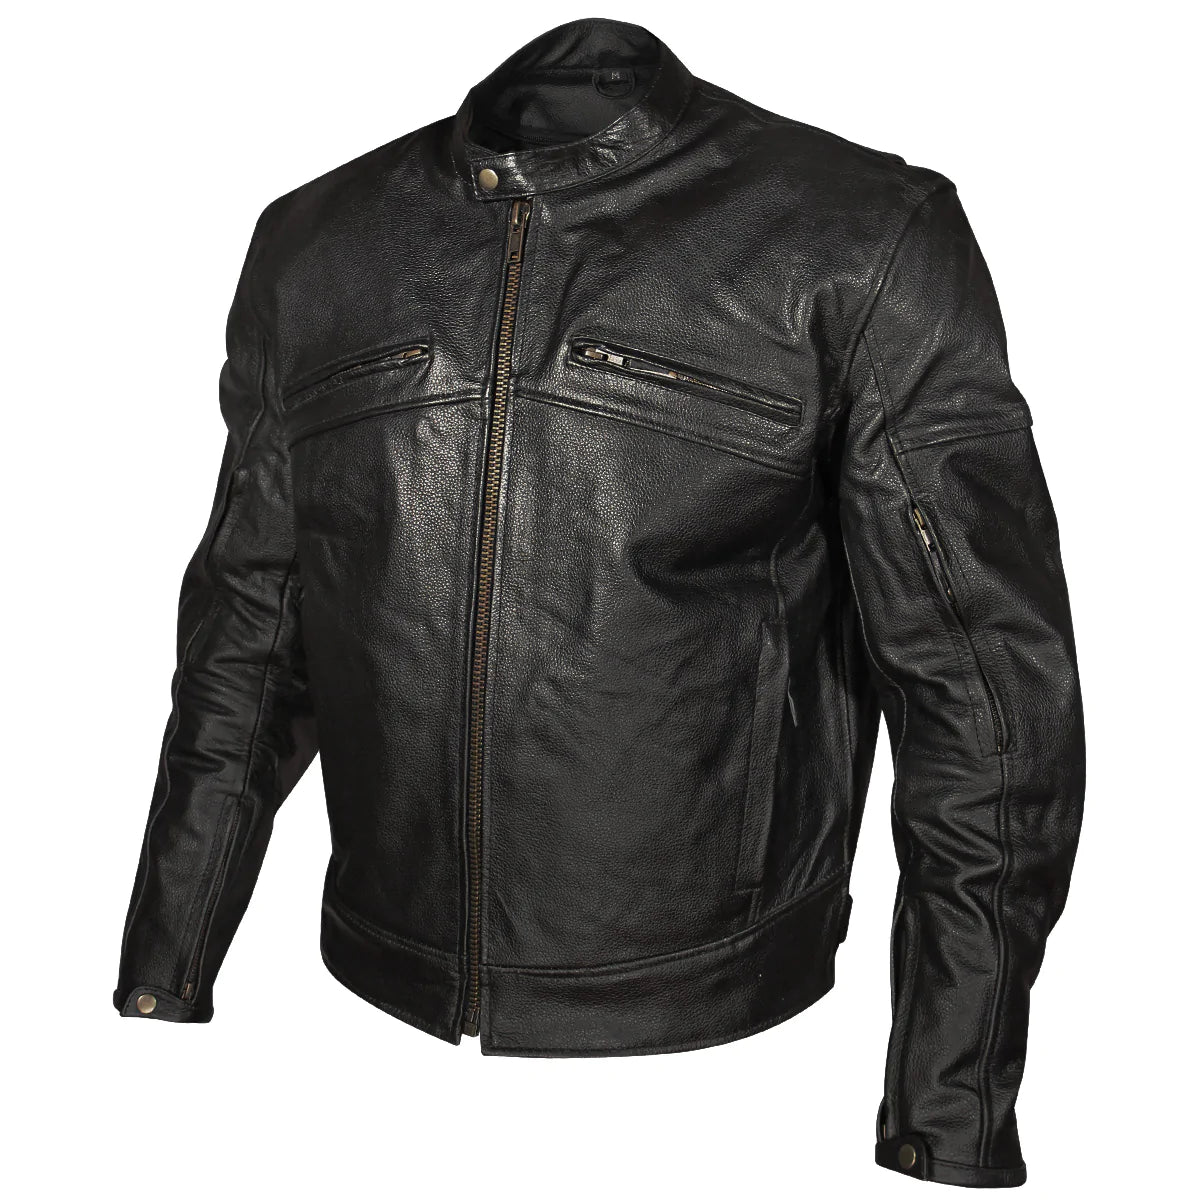 Xelement XSPR105 Men's 'The Racer' Black Armored Leather Racing Jacket ...